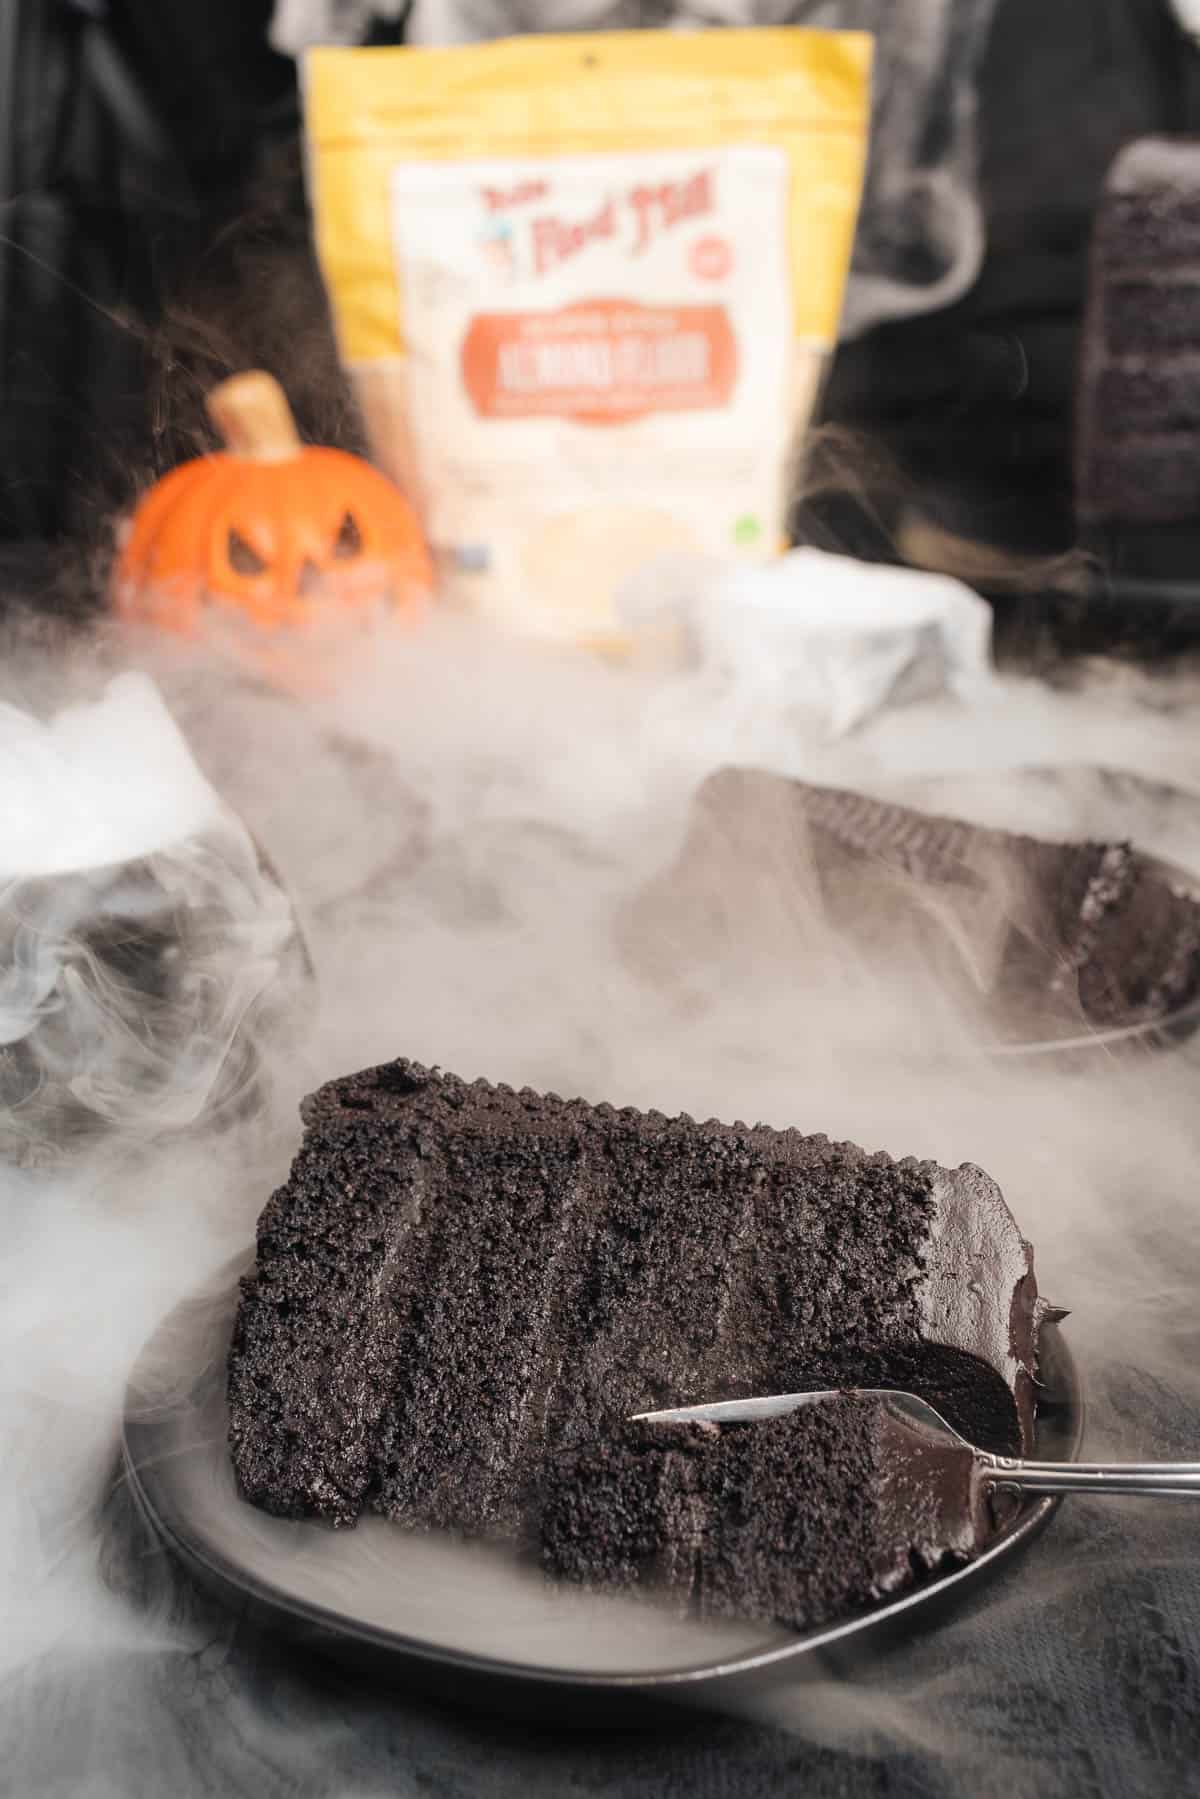 black velvet cake slices on black plates with a spooky halloween scene in the background and a bag of bob's red mill almond flour